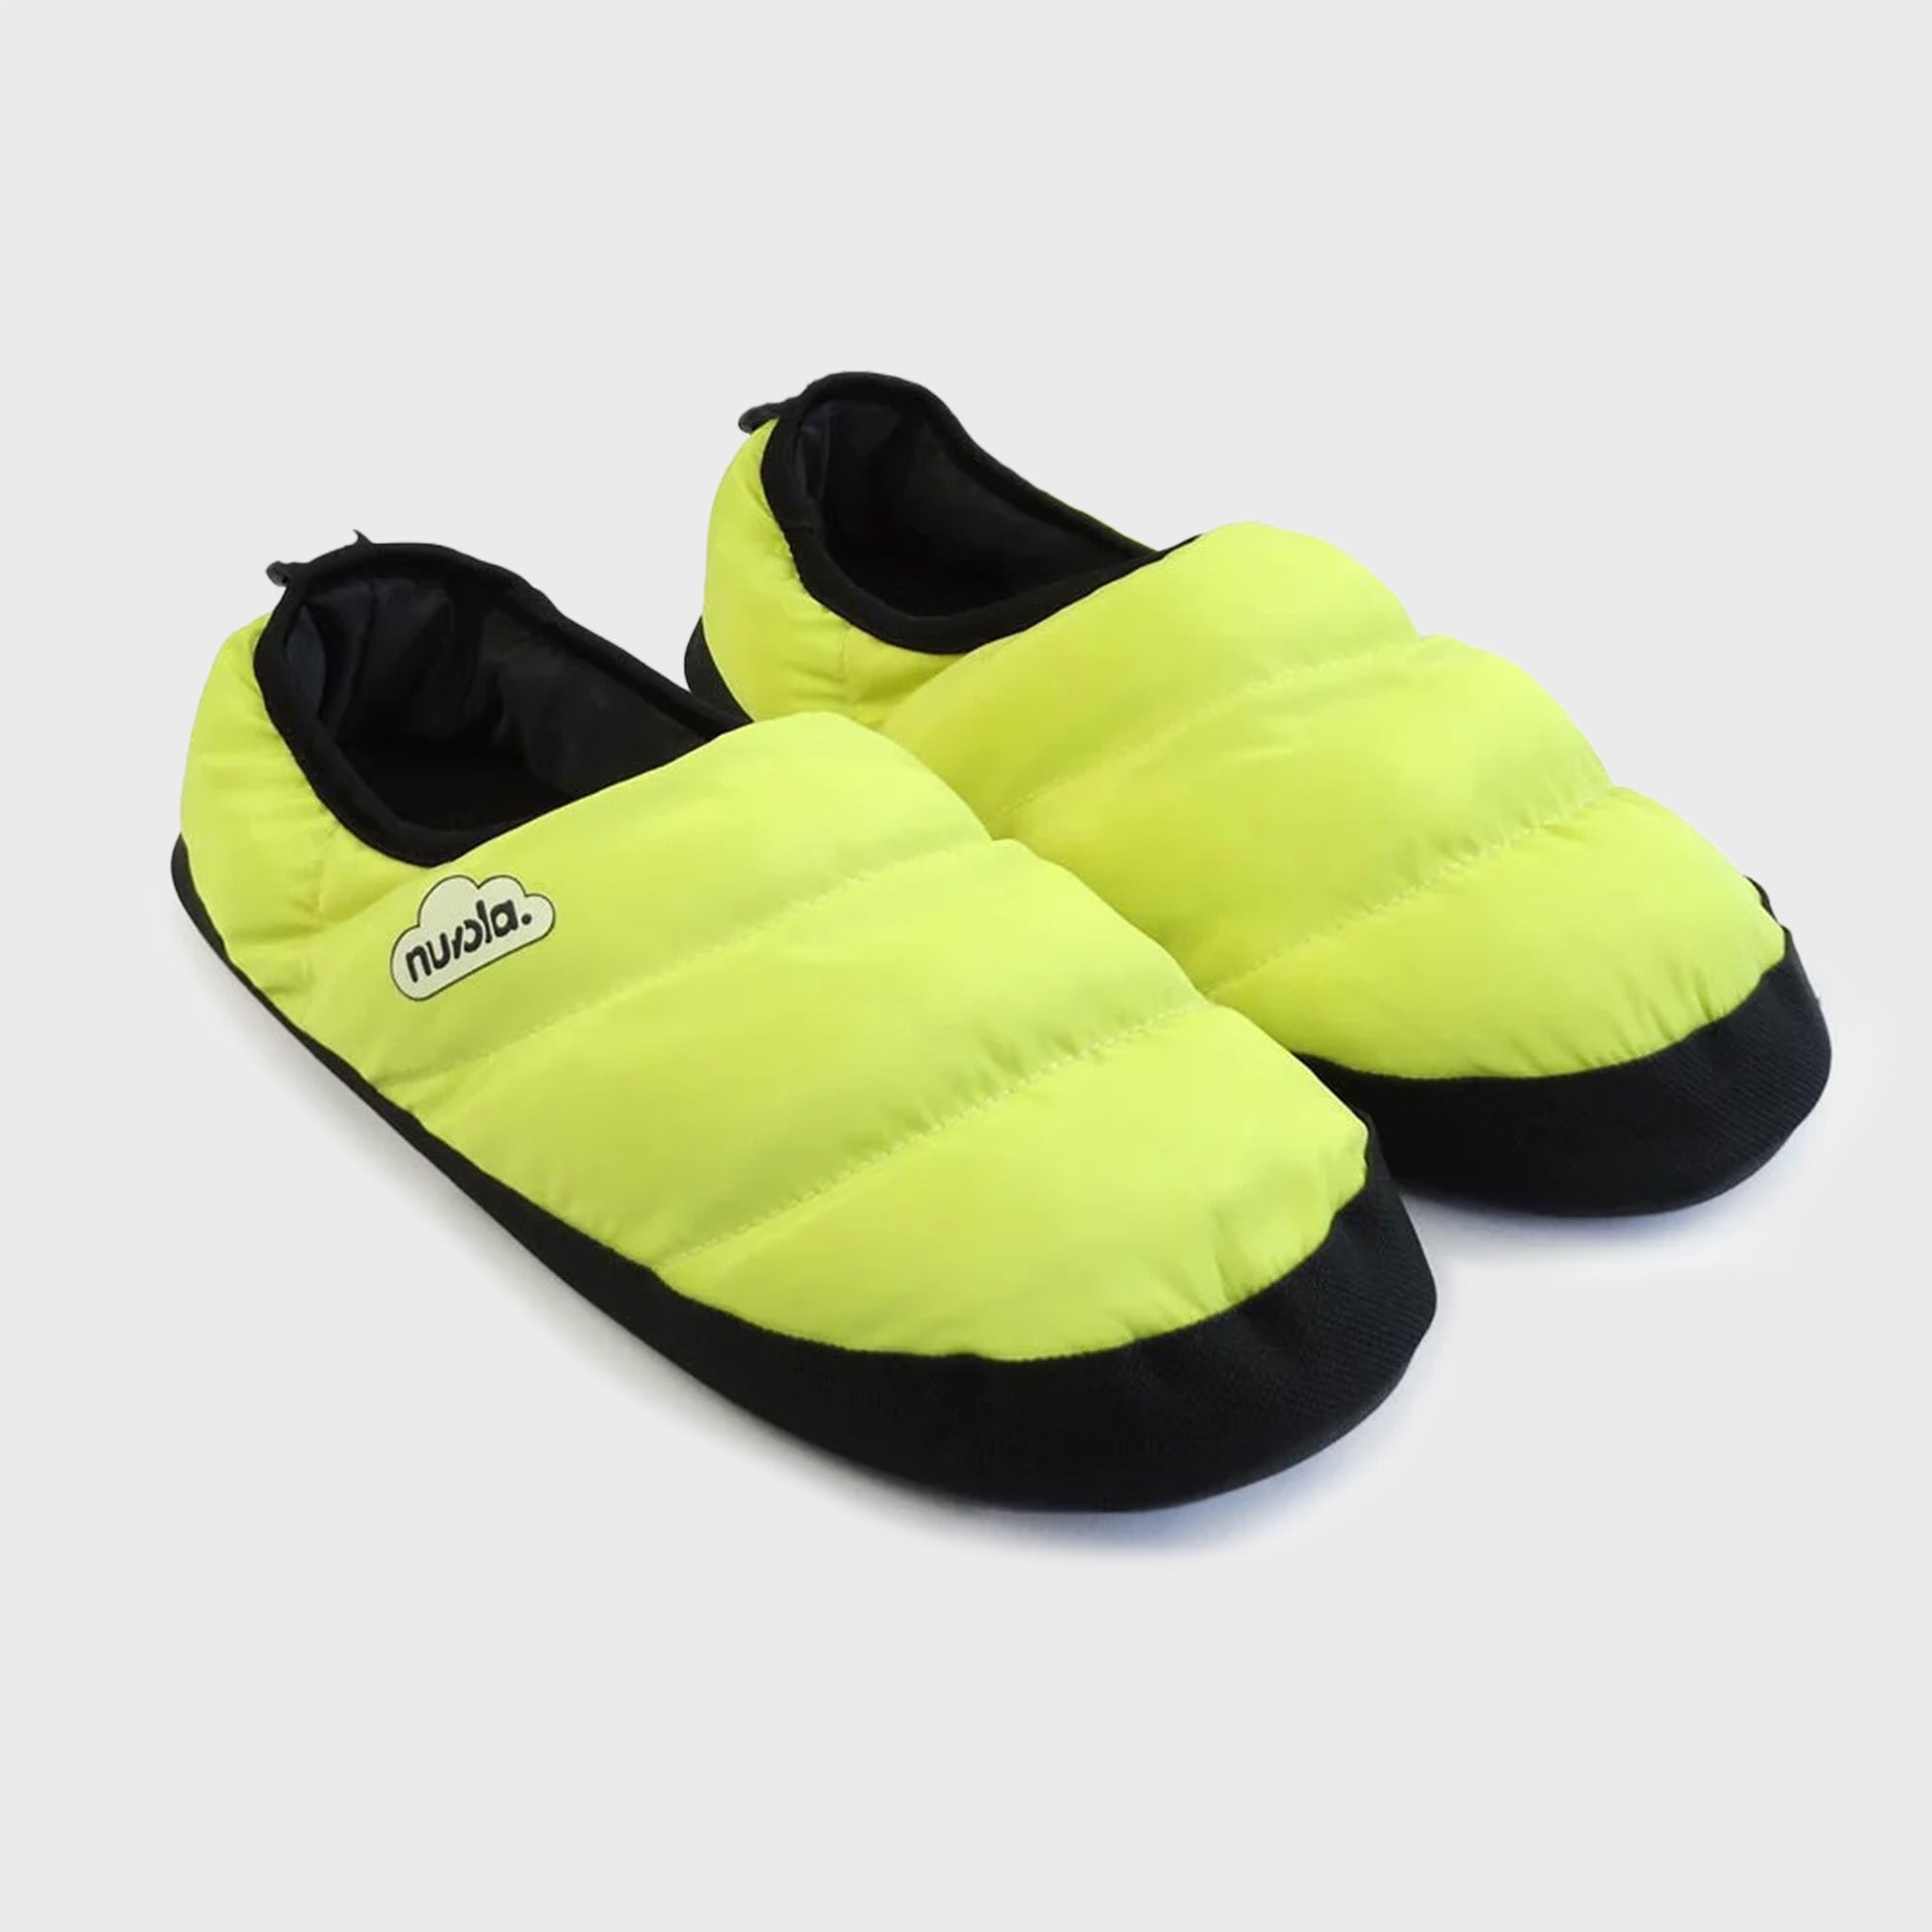 Nuvola Classic Slippers in Yellow CNCLAG14 FROM EIGHTYWINGOLD - OFFICIAL BRAND PARTNER